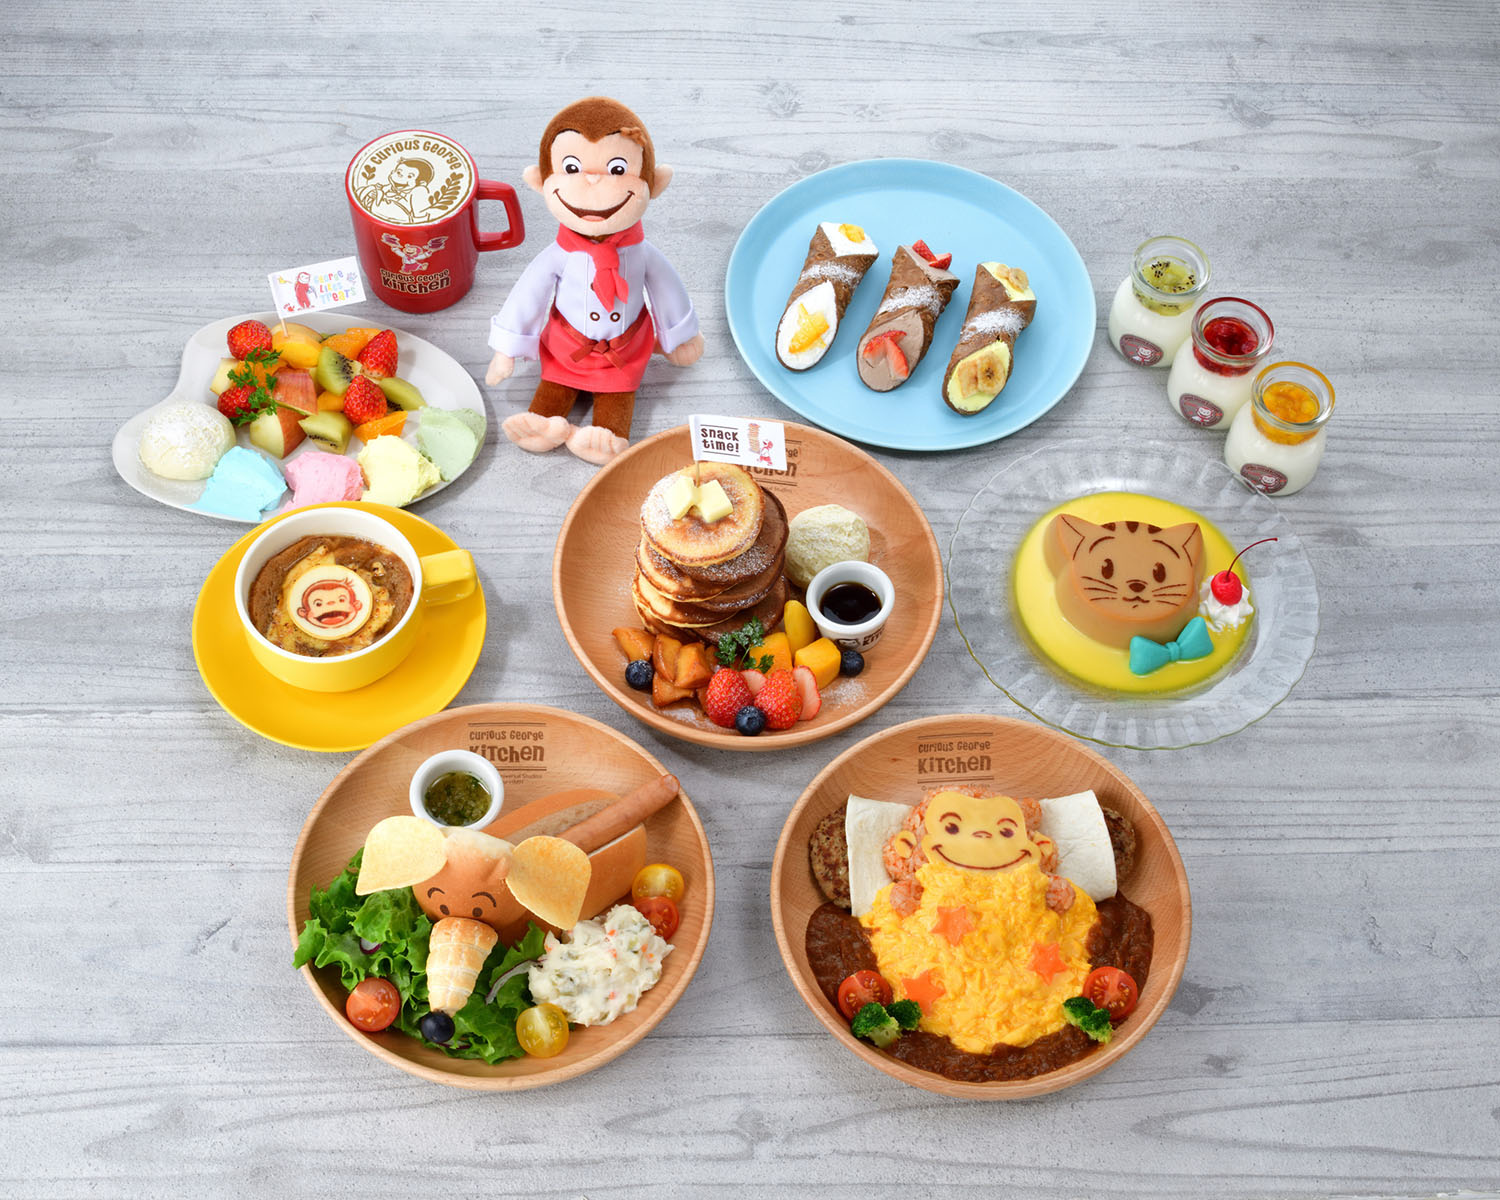 Curious George Theme Cafe in Tokyo 2022